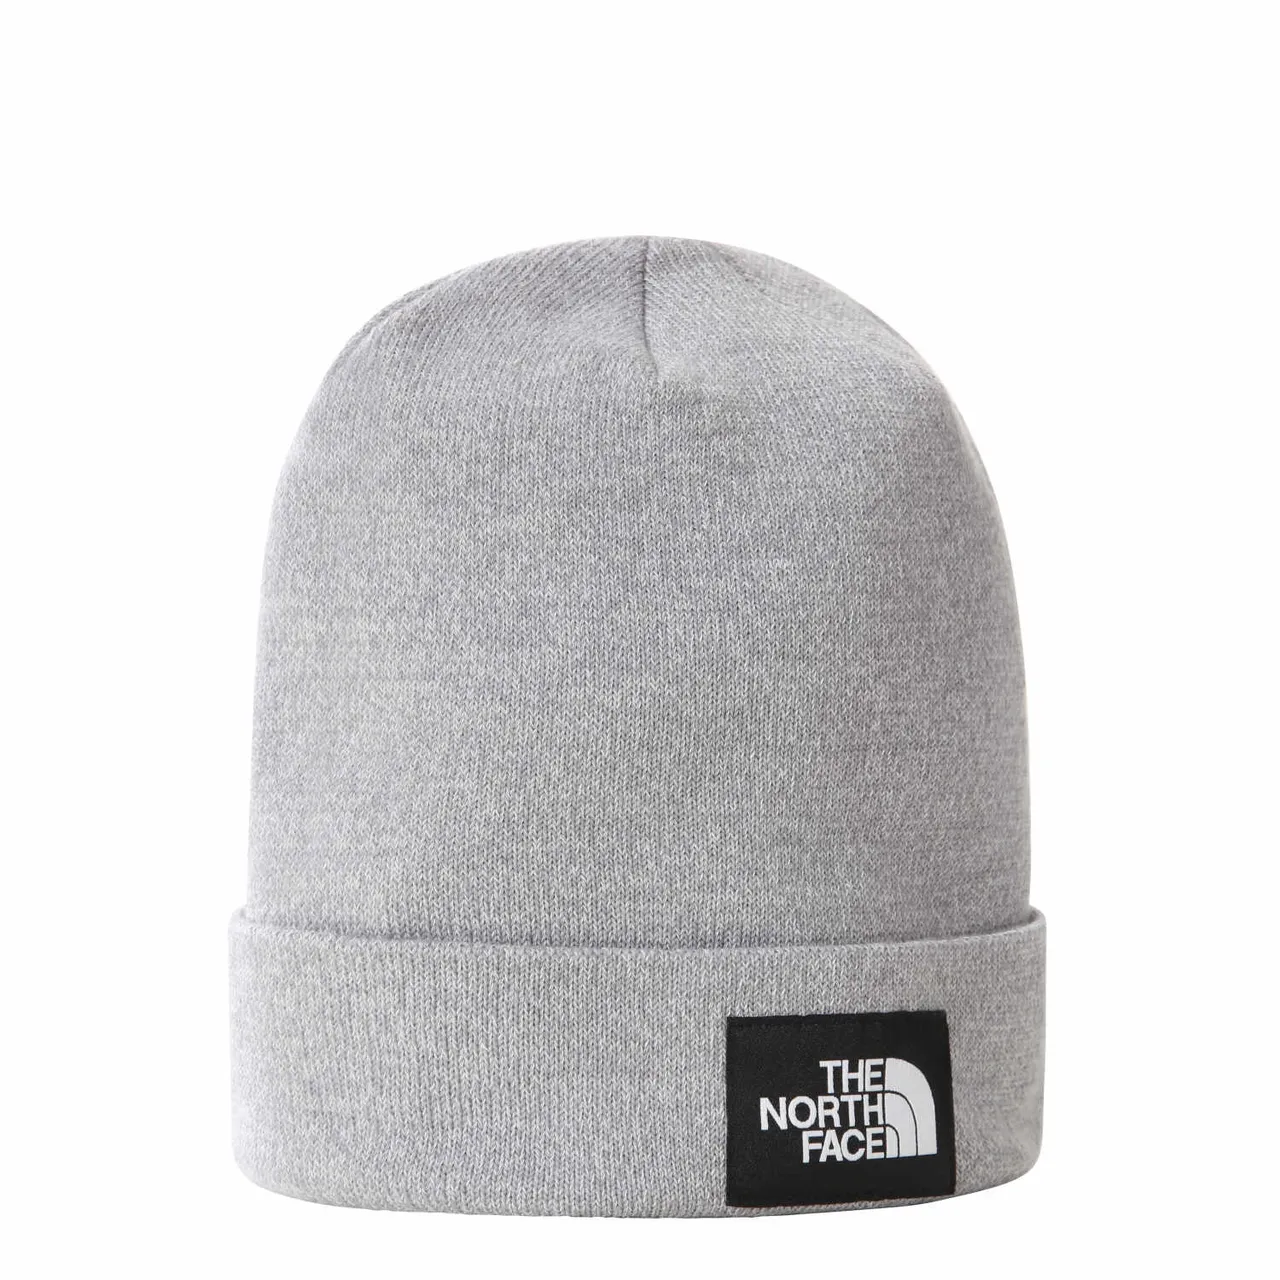 The North Face Dock Worker Recycled Beanie Mütze grau